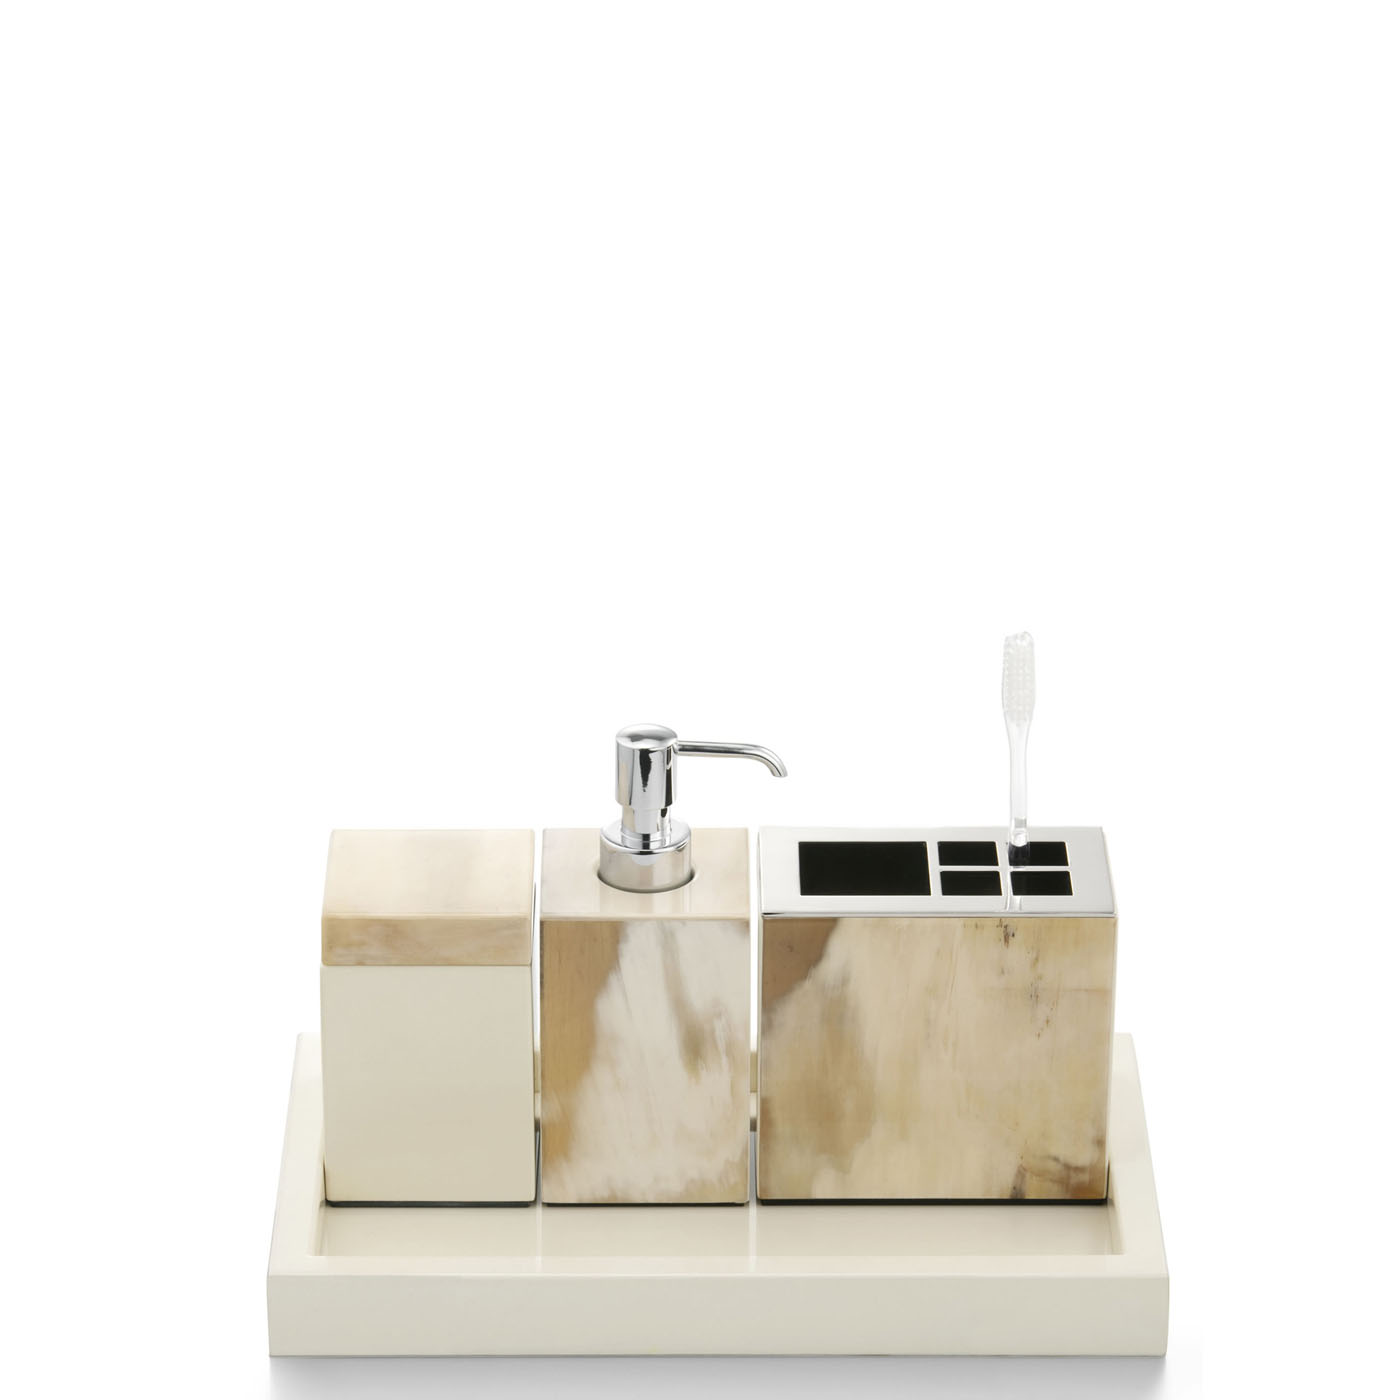 Bath sets - Iris bath set in horn and glossy ivory lacquered wood - Arcahorn